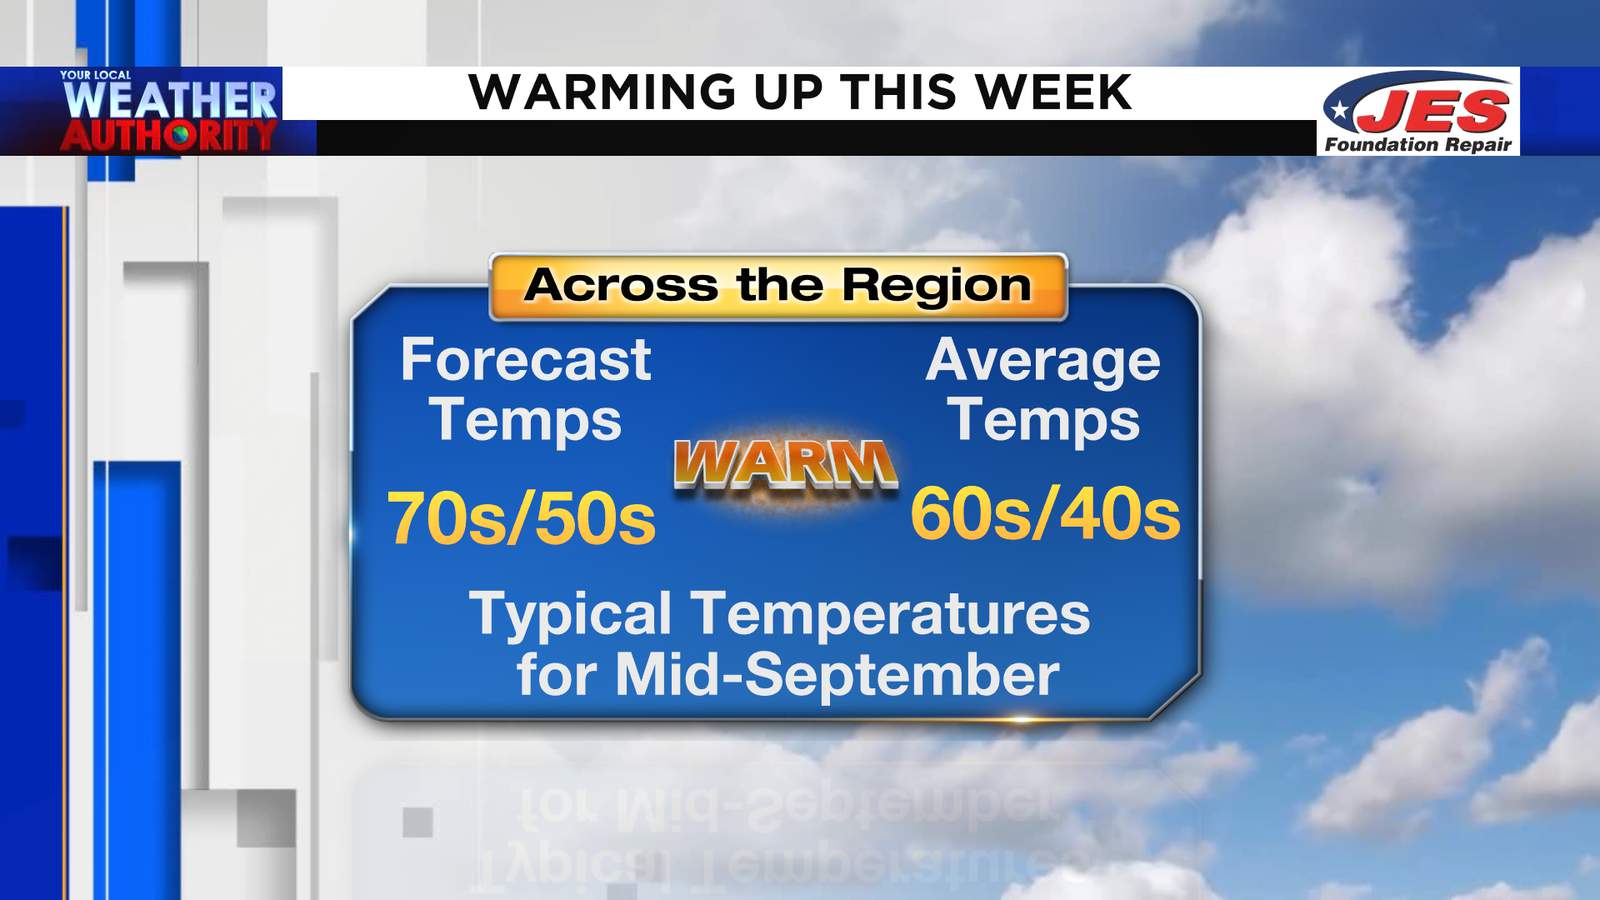 Fall back! Mid-September warmth takes over the rest of the week